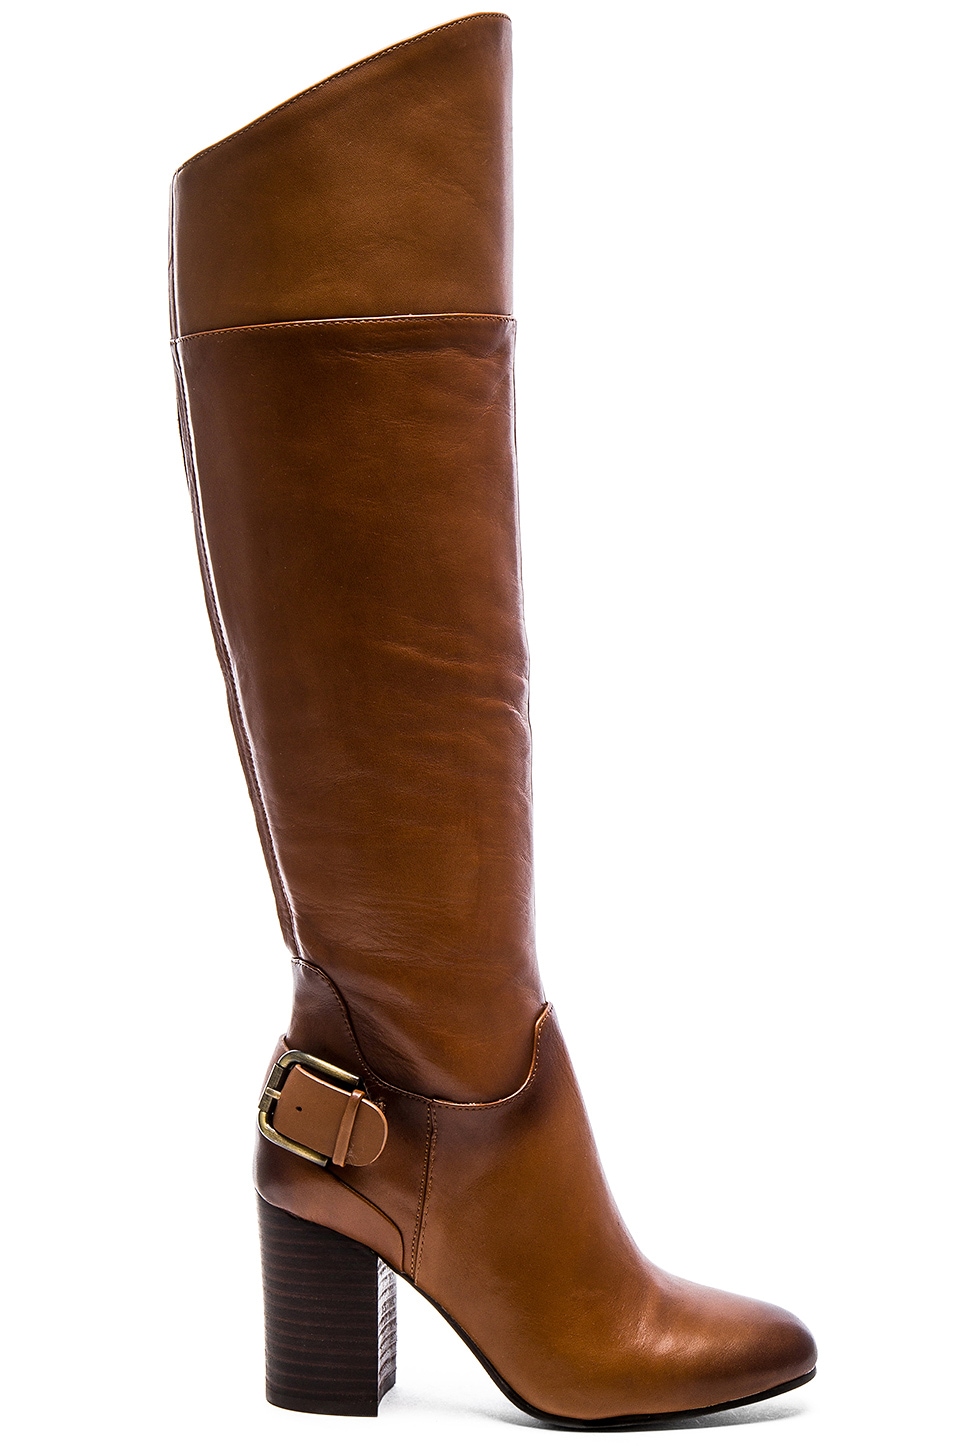 Vince Camuto Sidney Boot in Warm Brown | REVOLVE